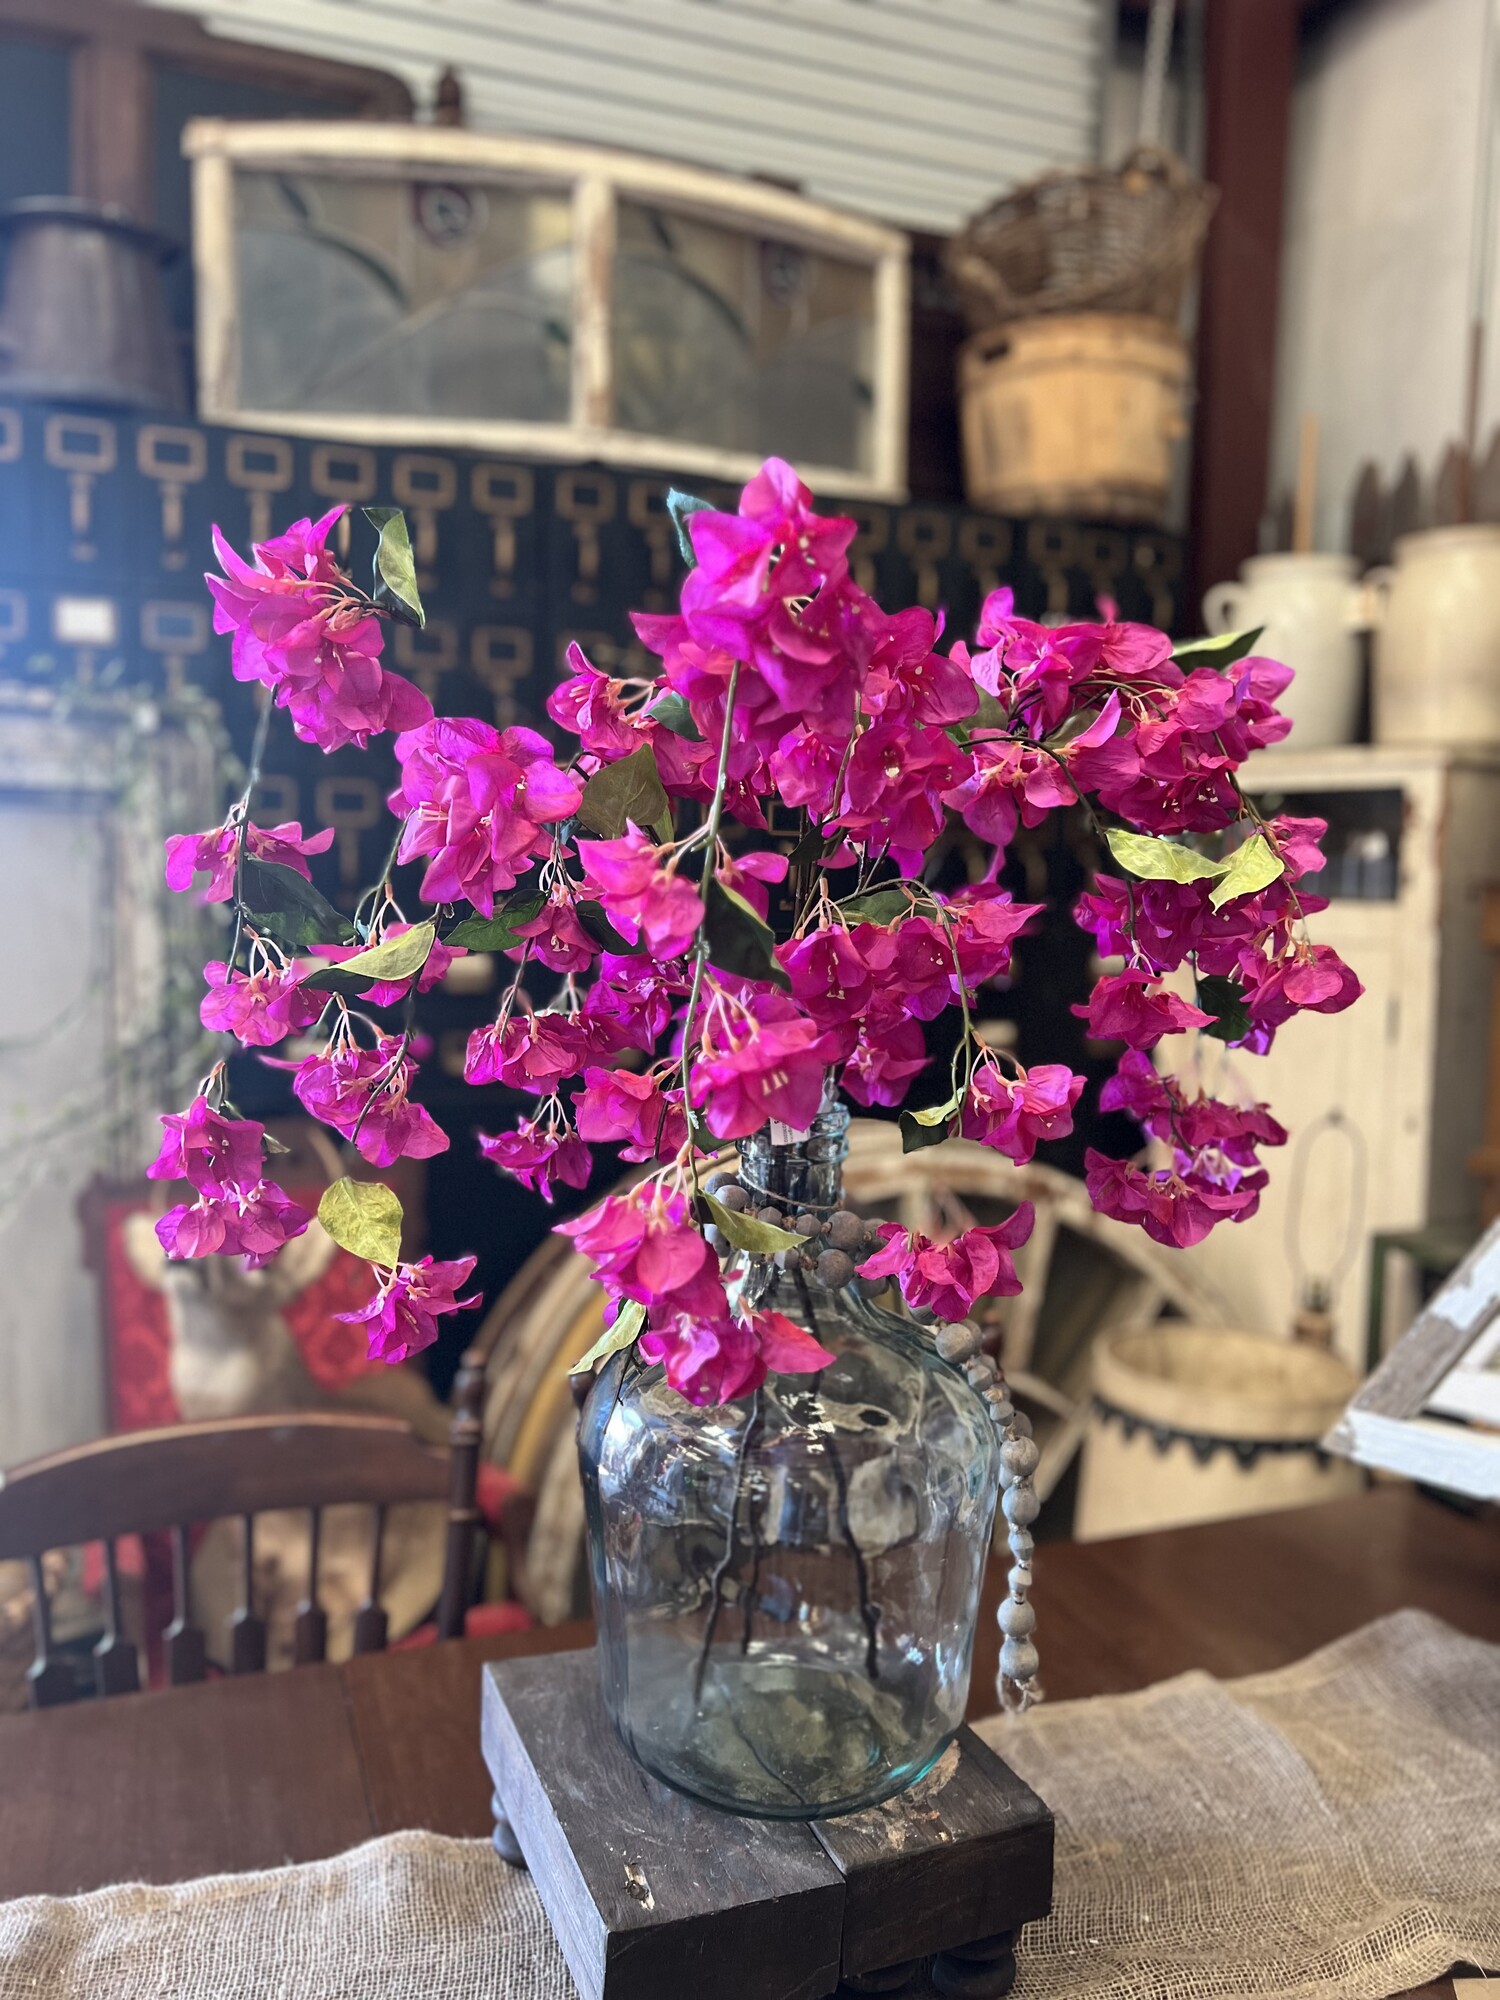 These gorgeous Draping Bougainvillea stems are stunning. Two or three stems in a large glass vase make a beautiful focal point in your home
Stem measures 46 inches in length